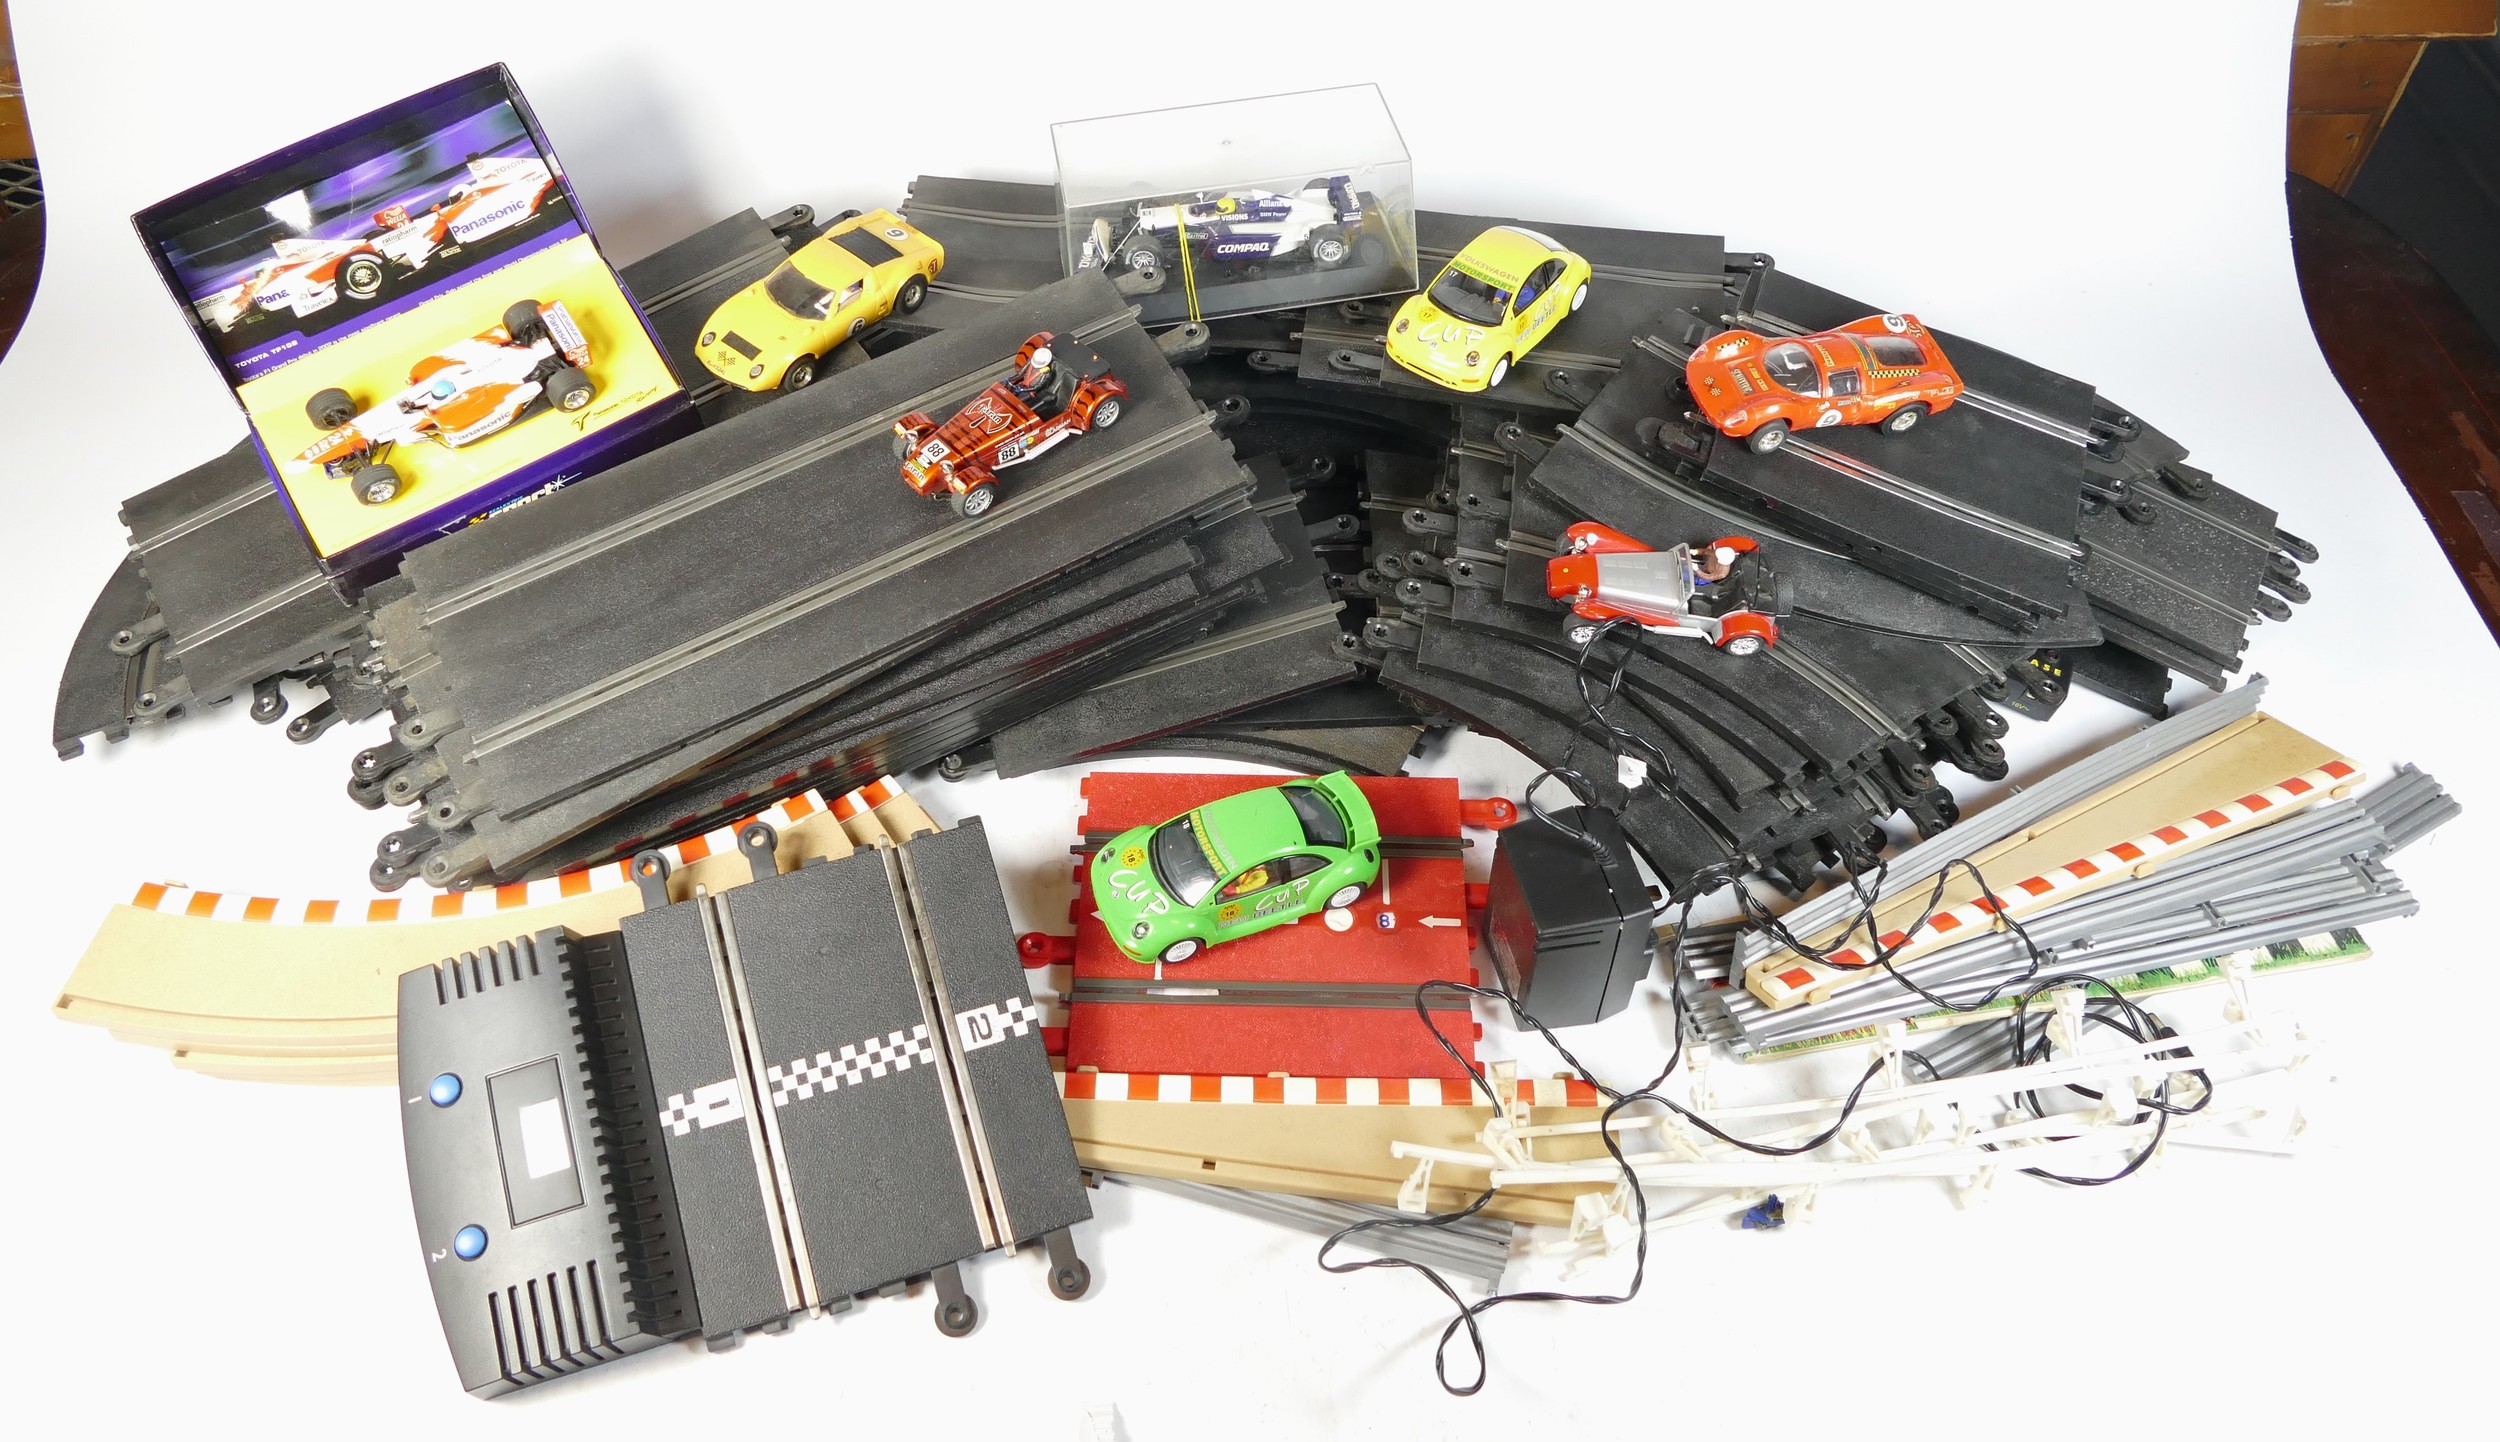 A collection of Scalextric model racing parts, track, and cars.